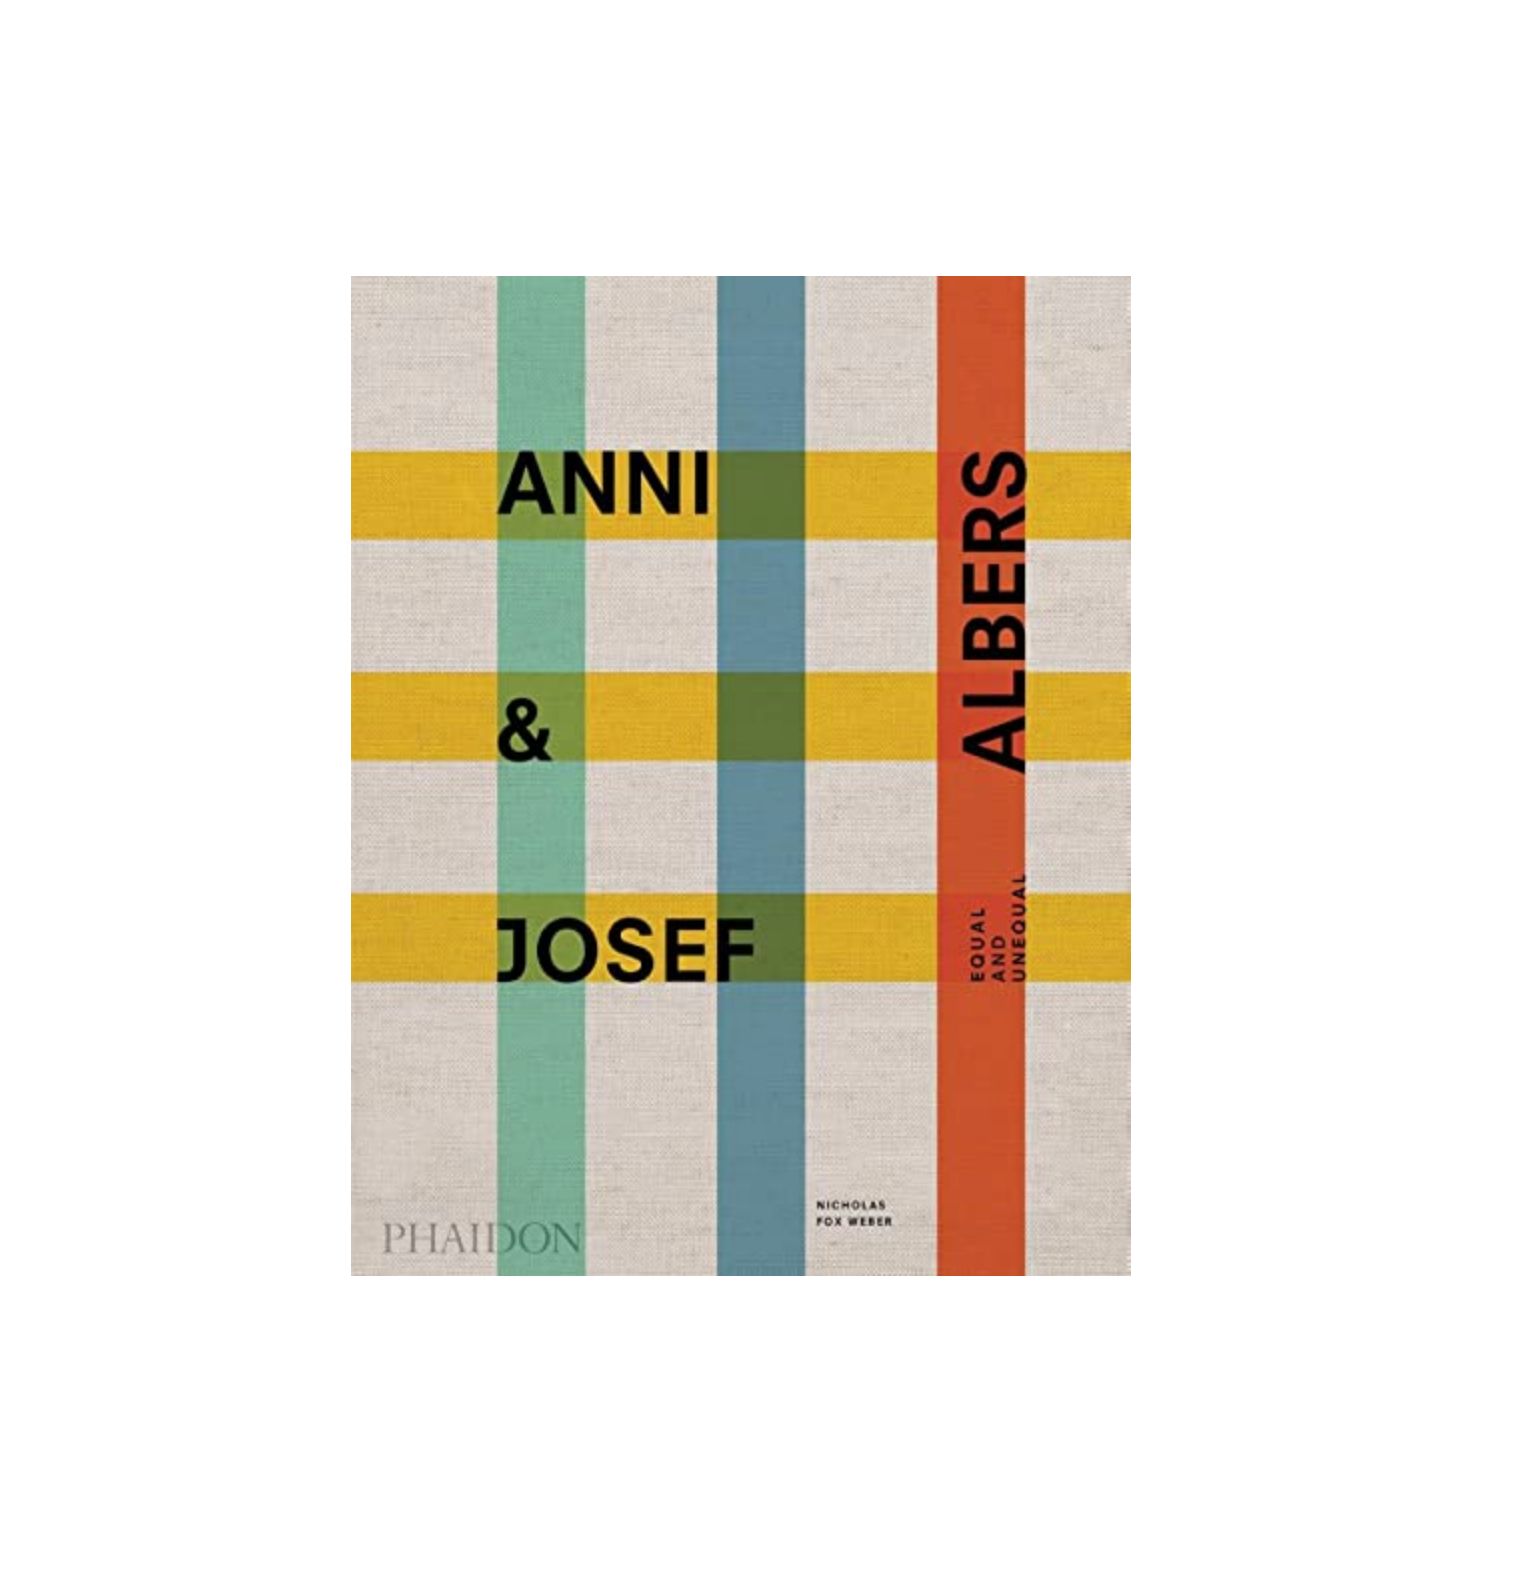 Anni and Josef Albers Equal and Unequal book by Nicholas Fox Weber